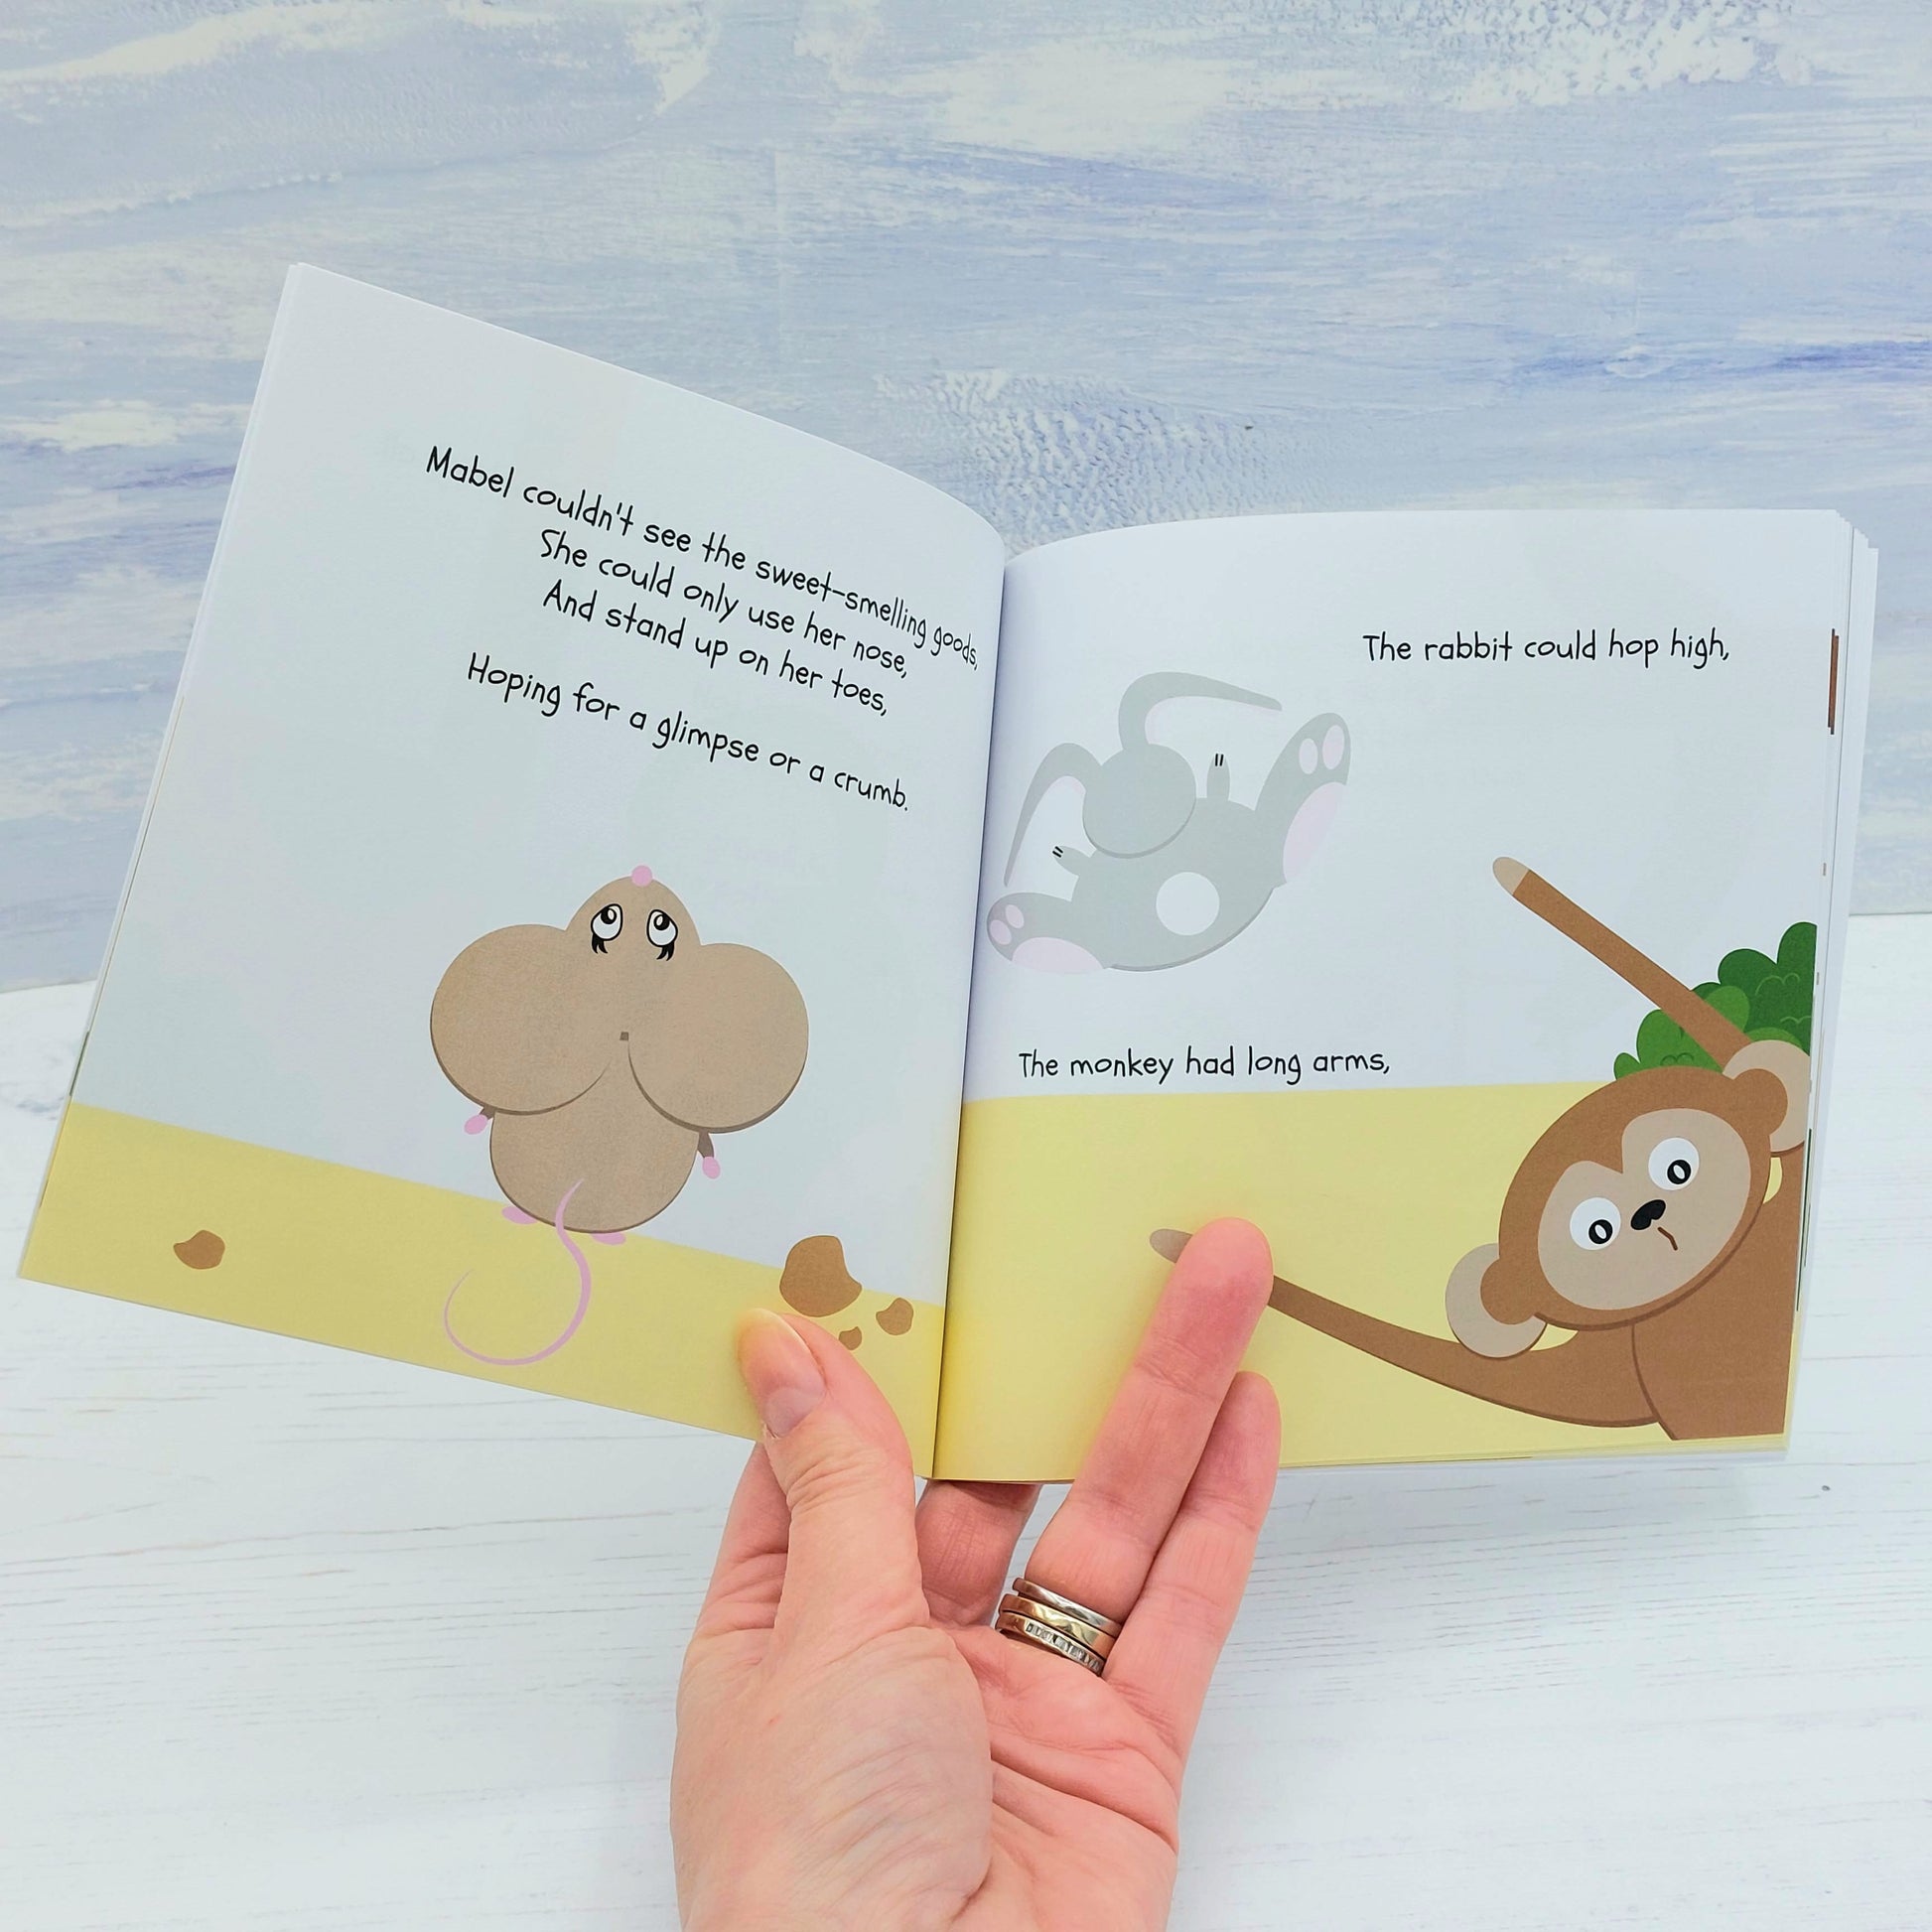 Inside the book - "the rabbit could hop high. The monkey had long arms"